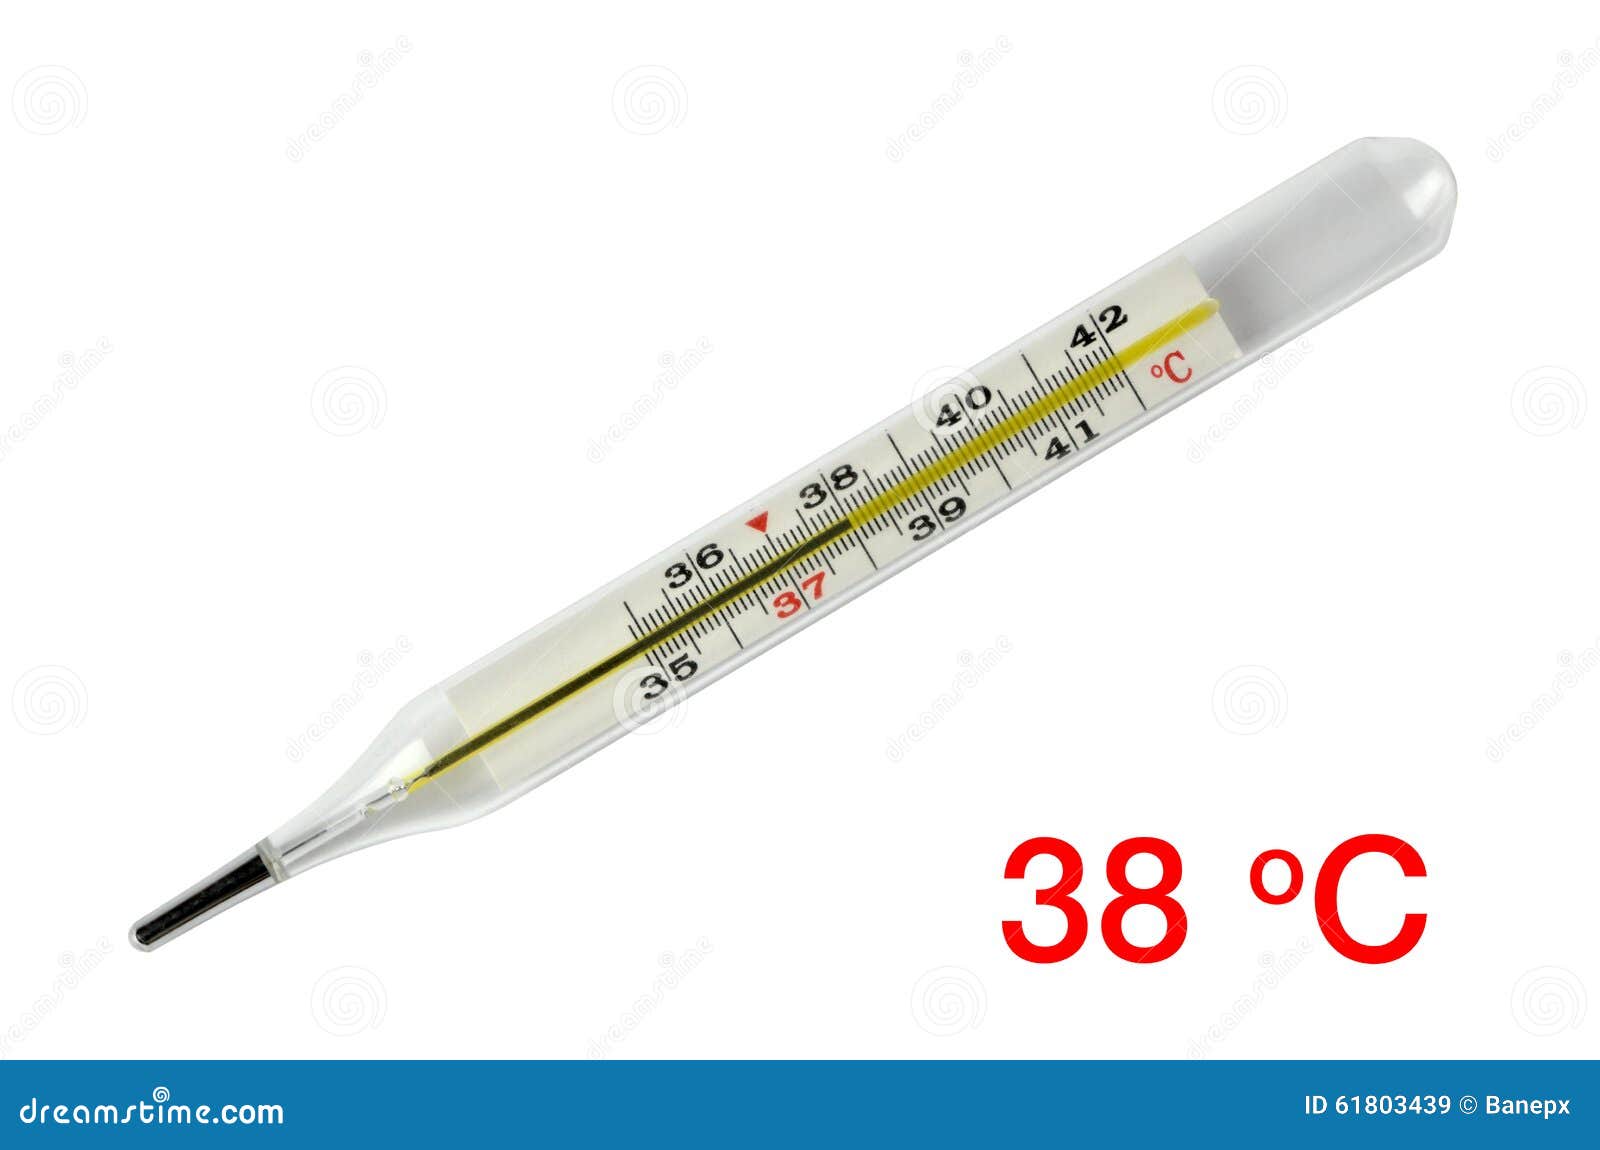 https://thumbs.dreamstime.com/z/body-temperature-thermometer-c-old-mercury-showing-degrees-celsius-isolated-white-background-61803439.jpg